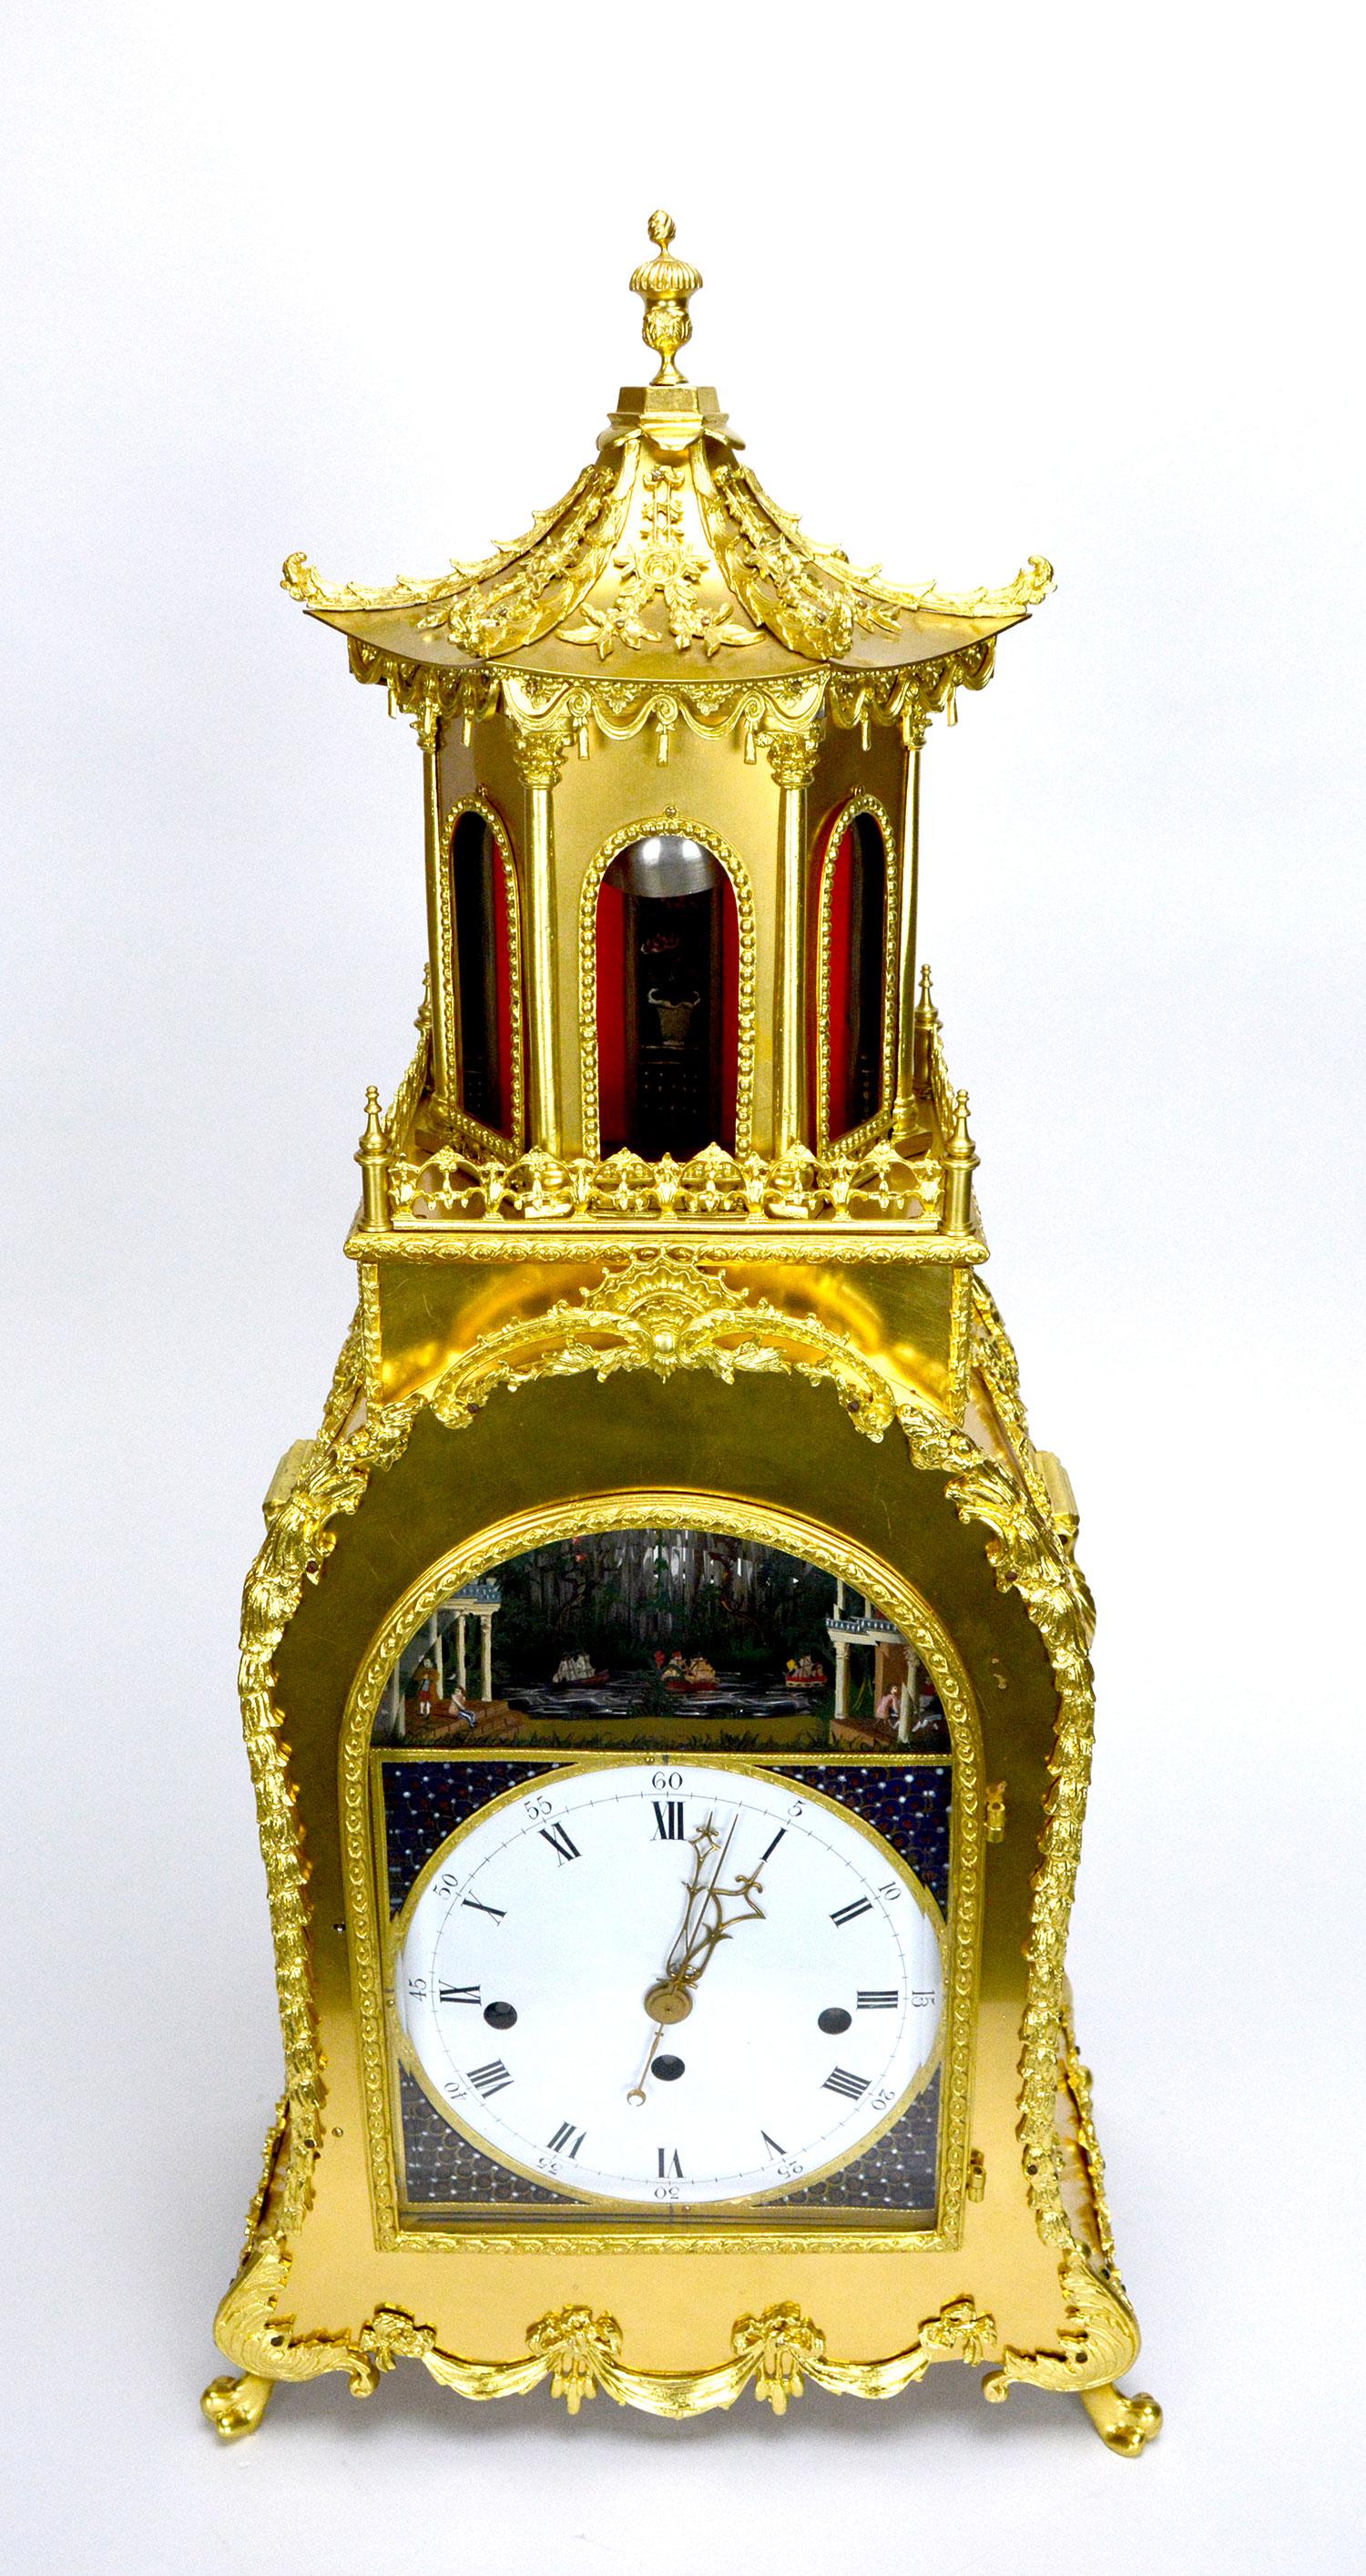 A large English George III Style Musical Automaton bracket clock. The gorgeous gilt bronze case is decorated with beautiful brass casting applications. There is a large pagoda on the top to make the appearance of this clock even more impressive. The